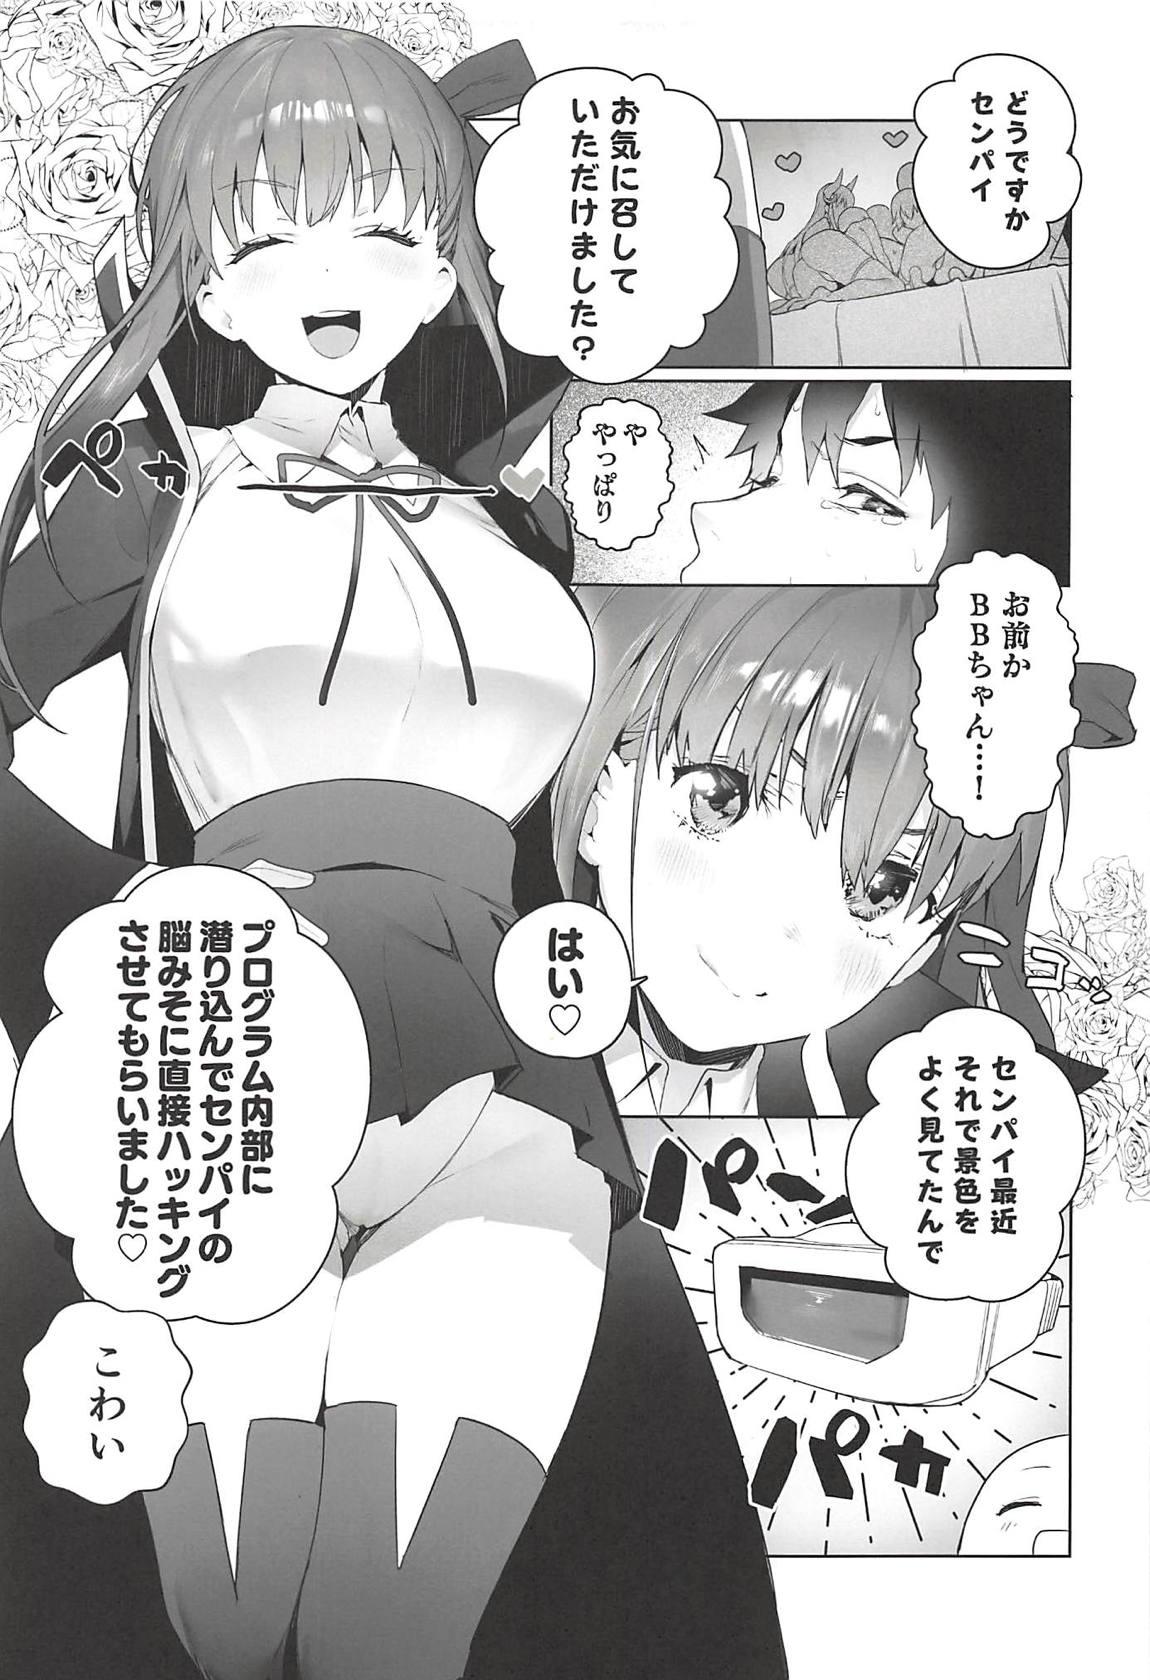 Exotic LOVELESS - Fate grand order Magrinha - Page 4